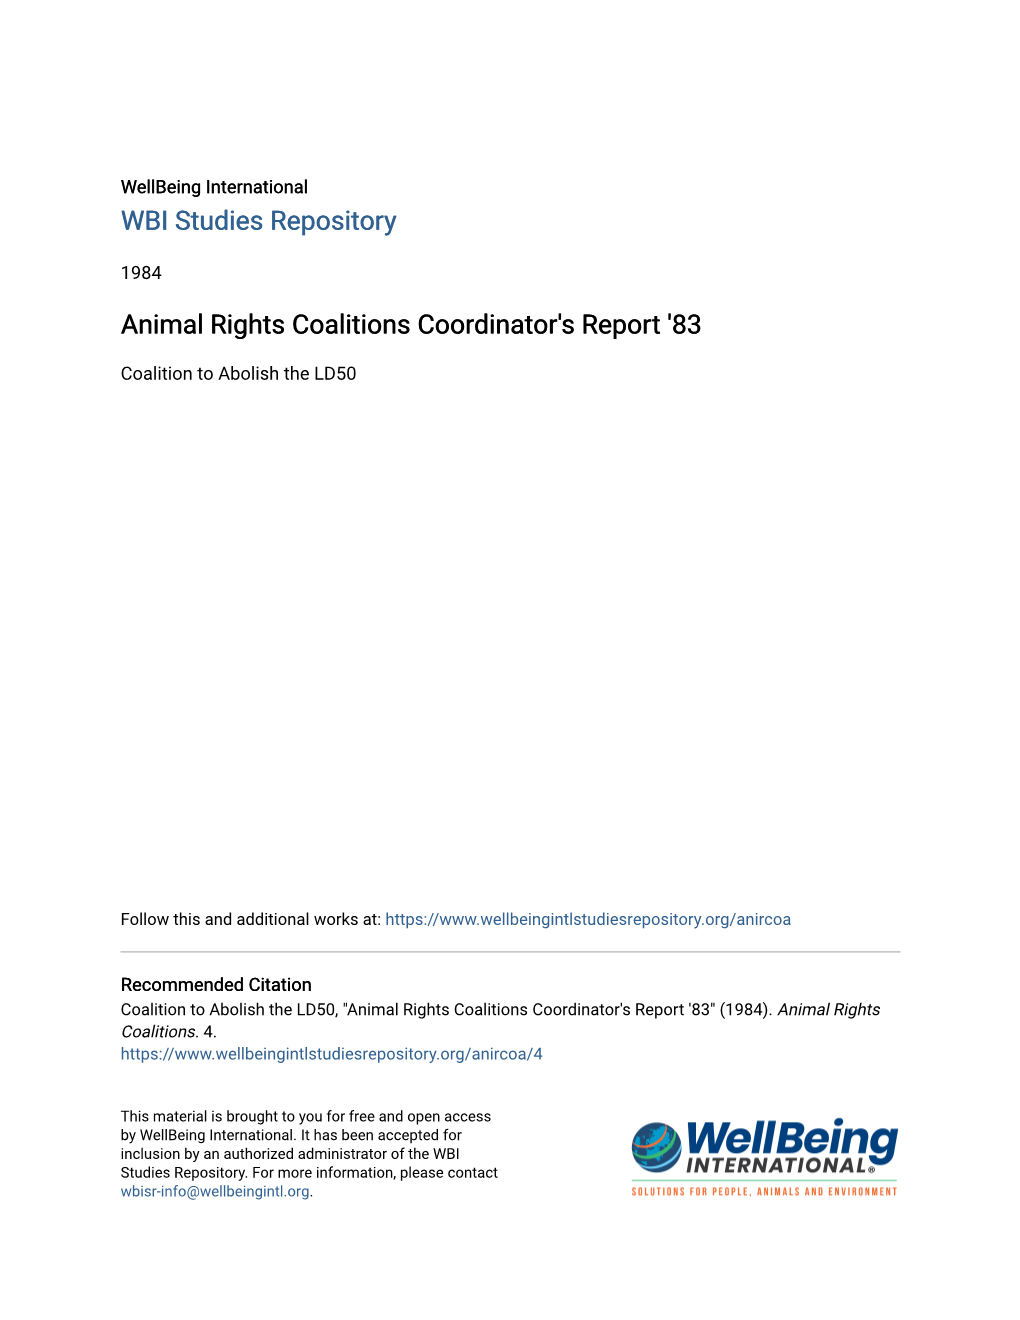 Animal Rights Coalitions Coordinator's Report '83